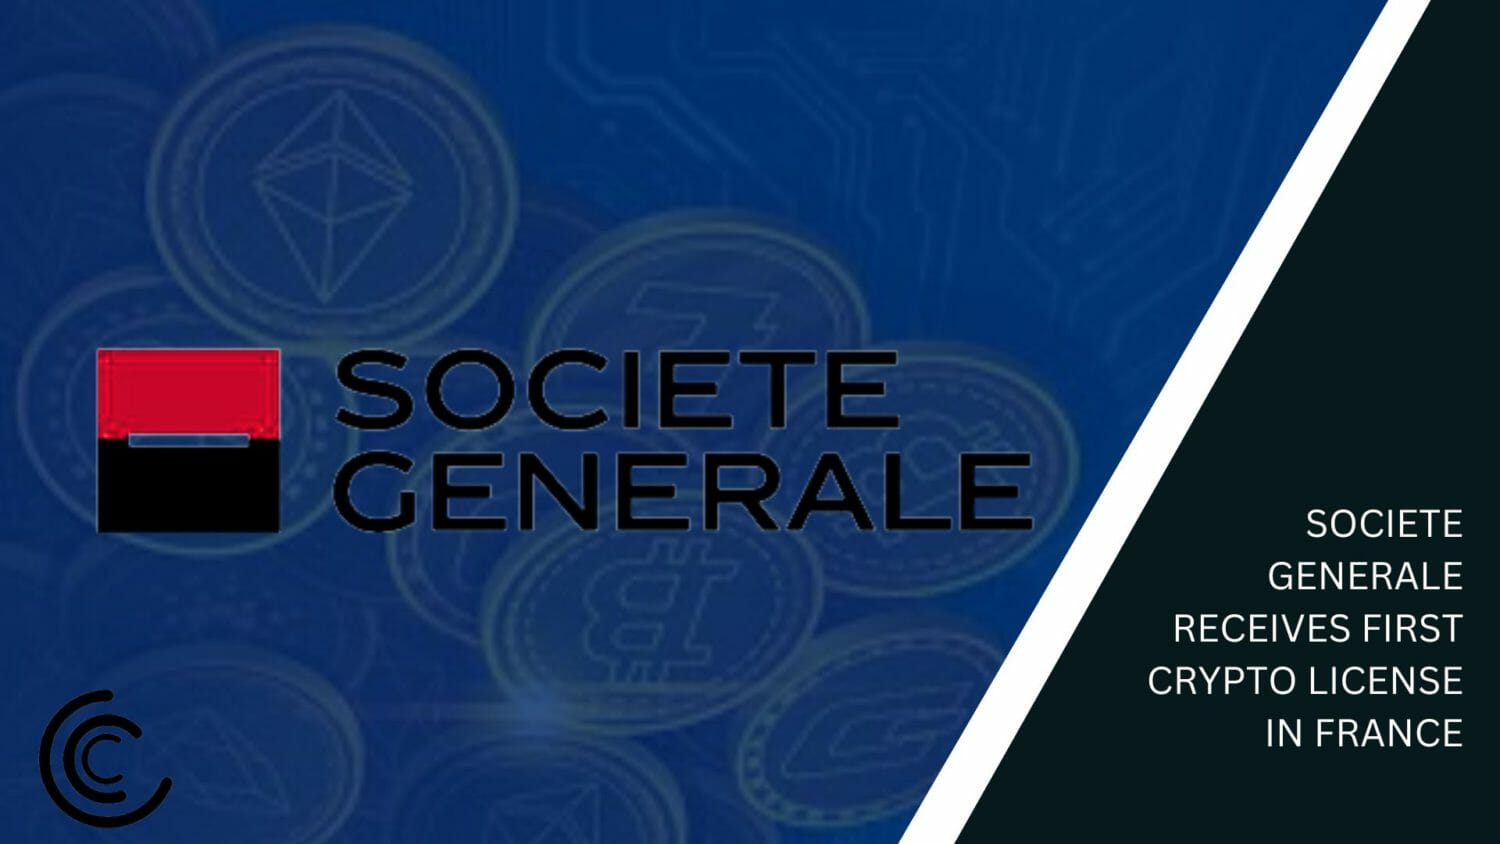 Societe Generale Receives First Crypto License In France